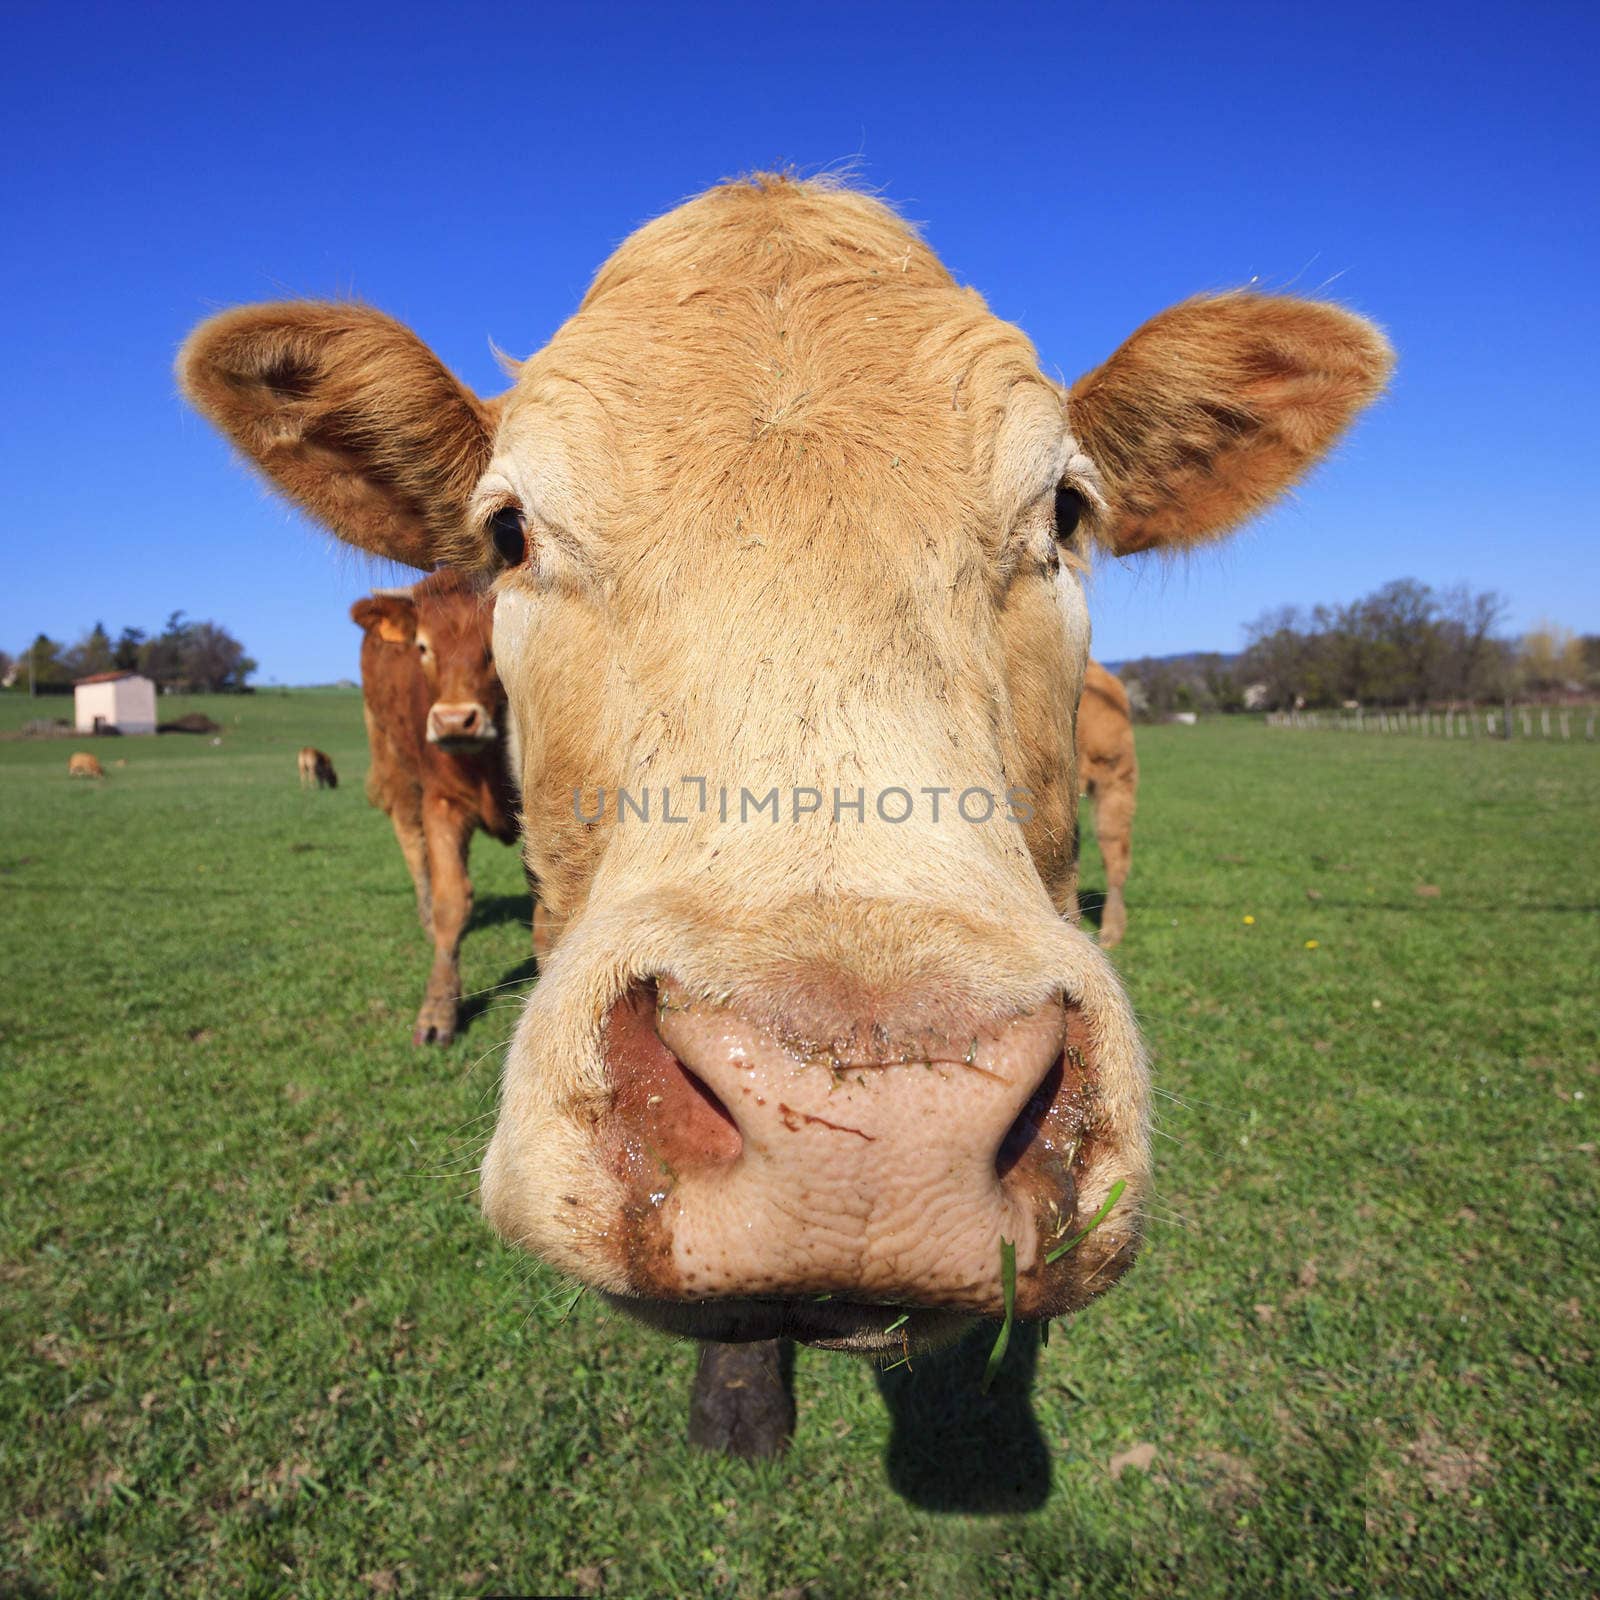 Cow on green grass and blue sky